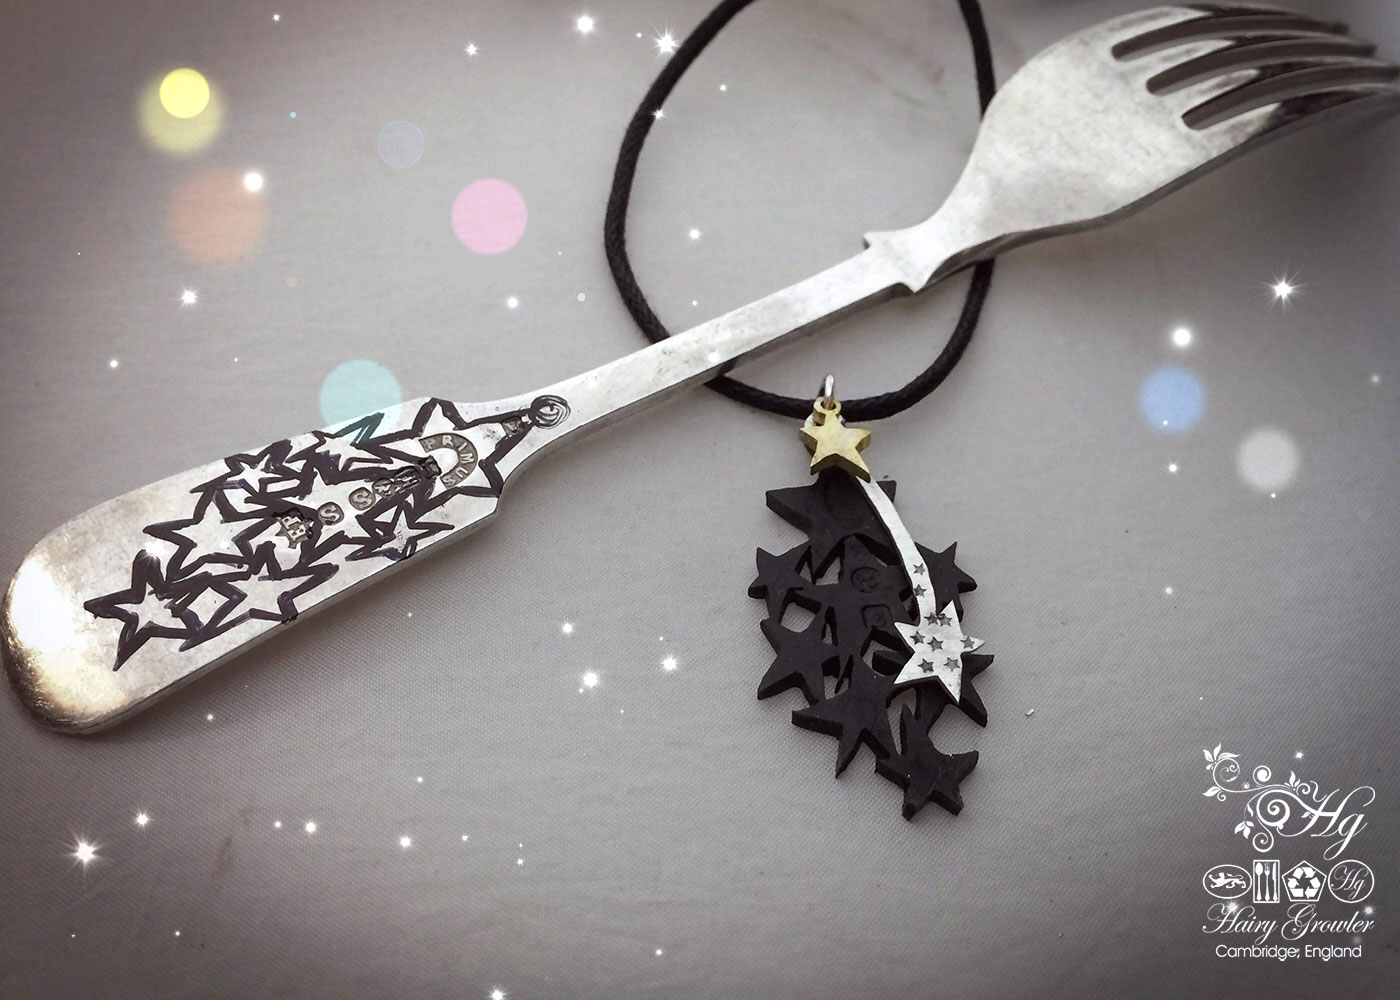 handcrafted and recycled star crossed spoon necklace pendant